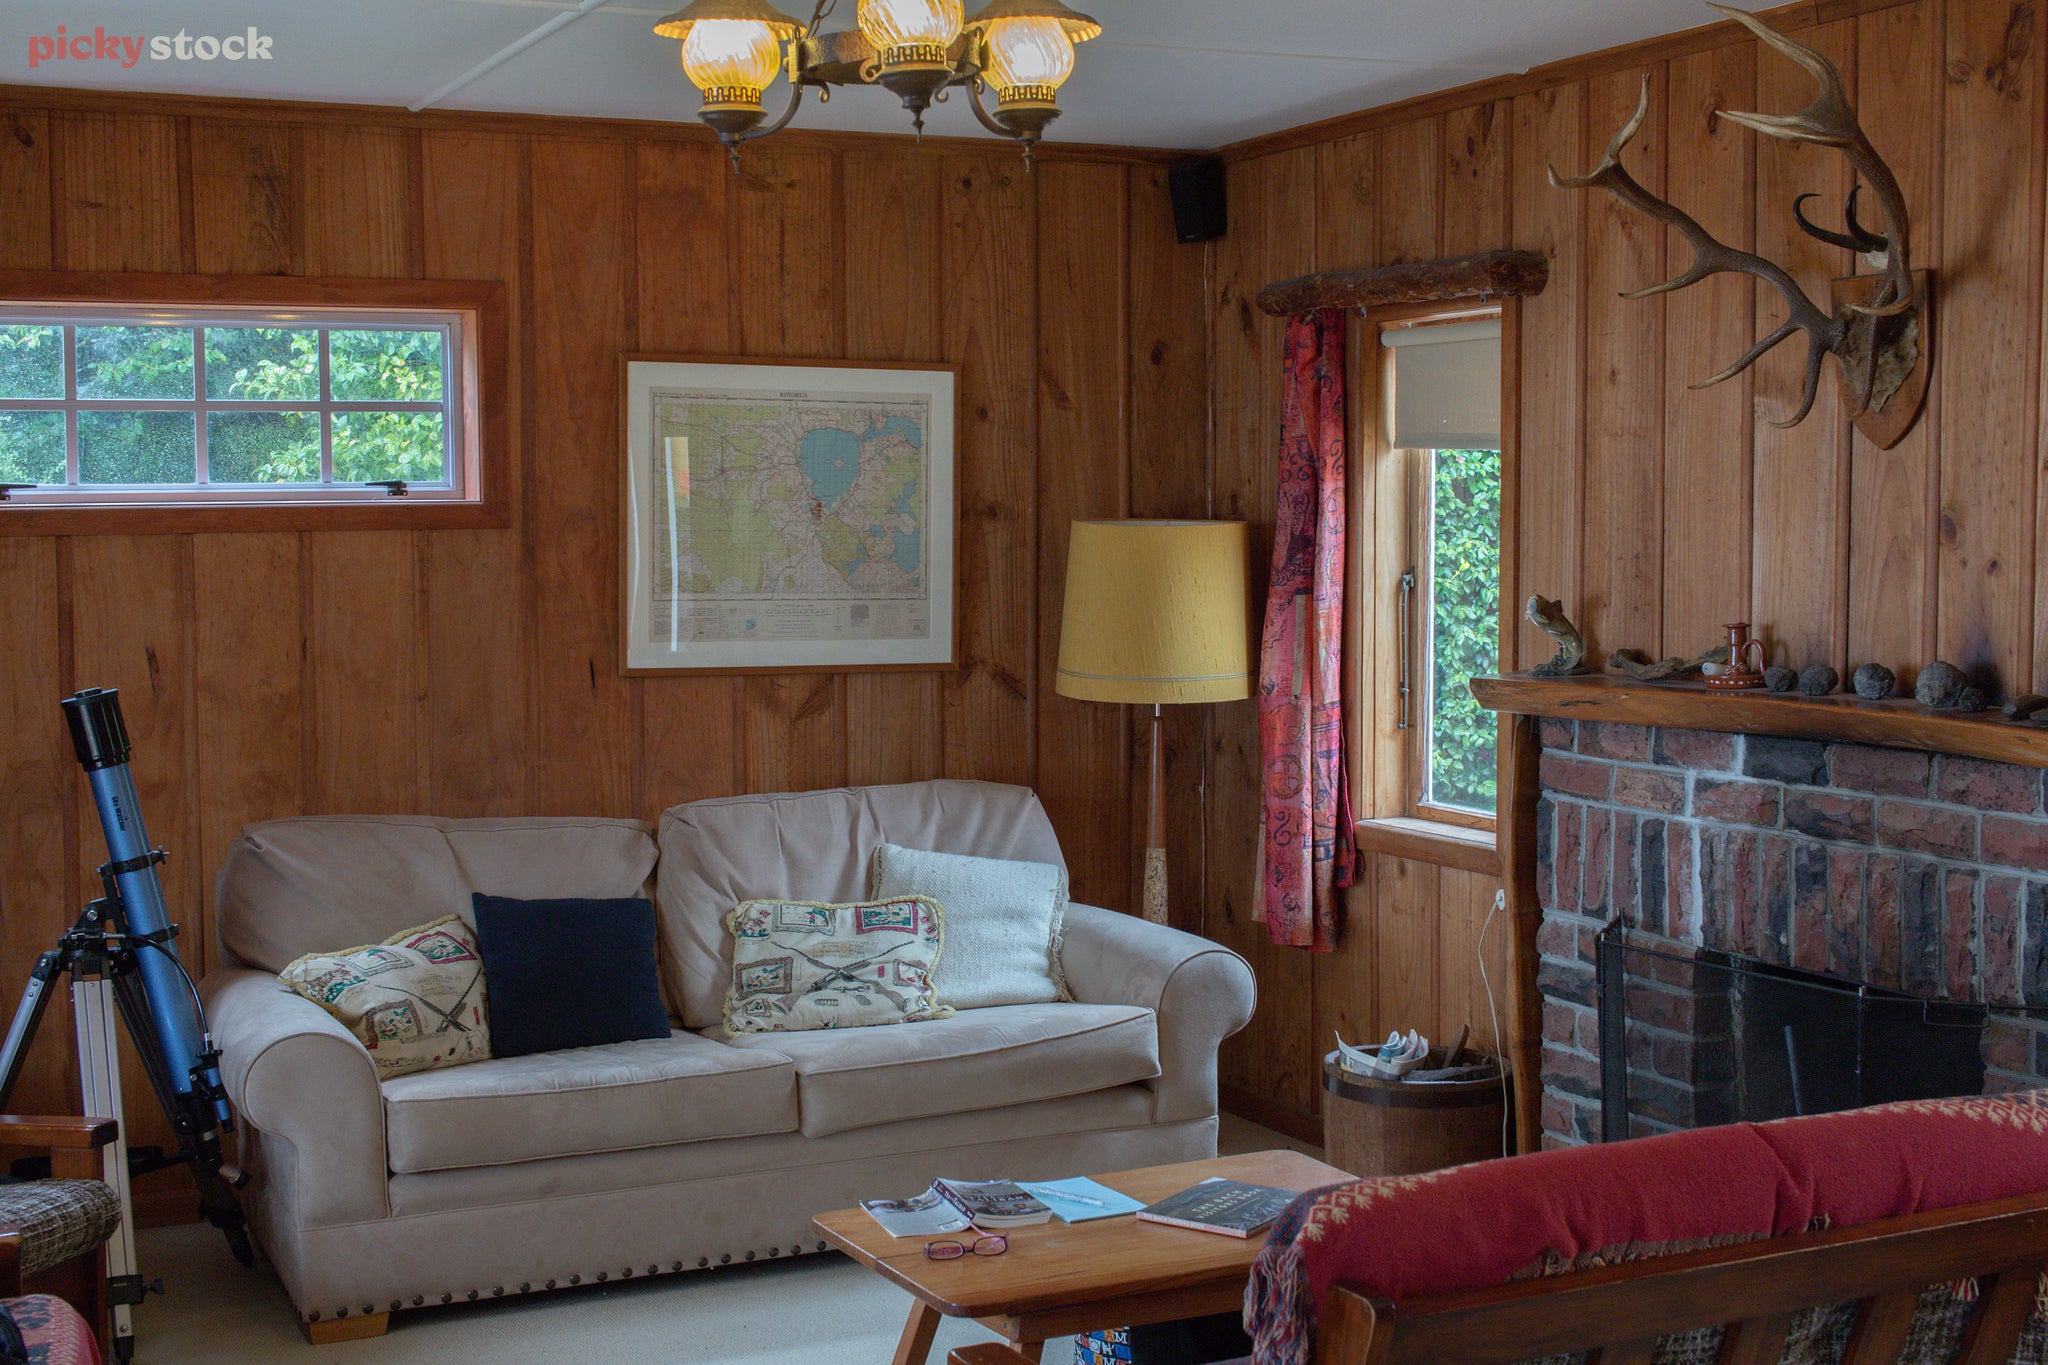 Landscape of a living room with antique furnishing and decor a set of antlers hang over a brick fireplace. A large telescope sits folded in the corner next to a framed map.